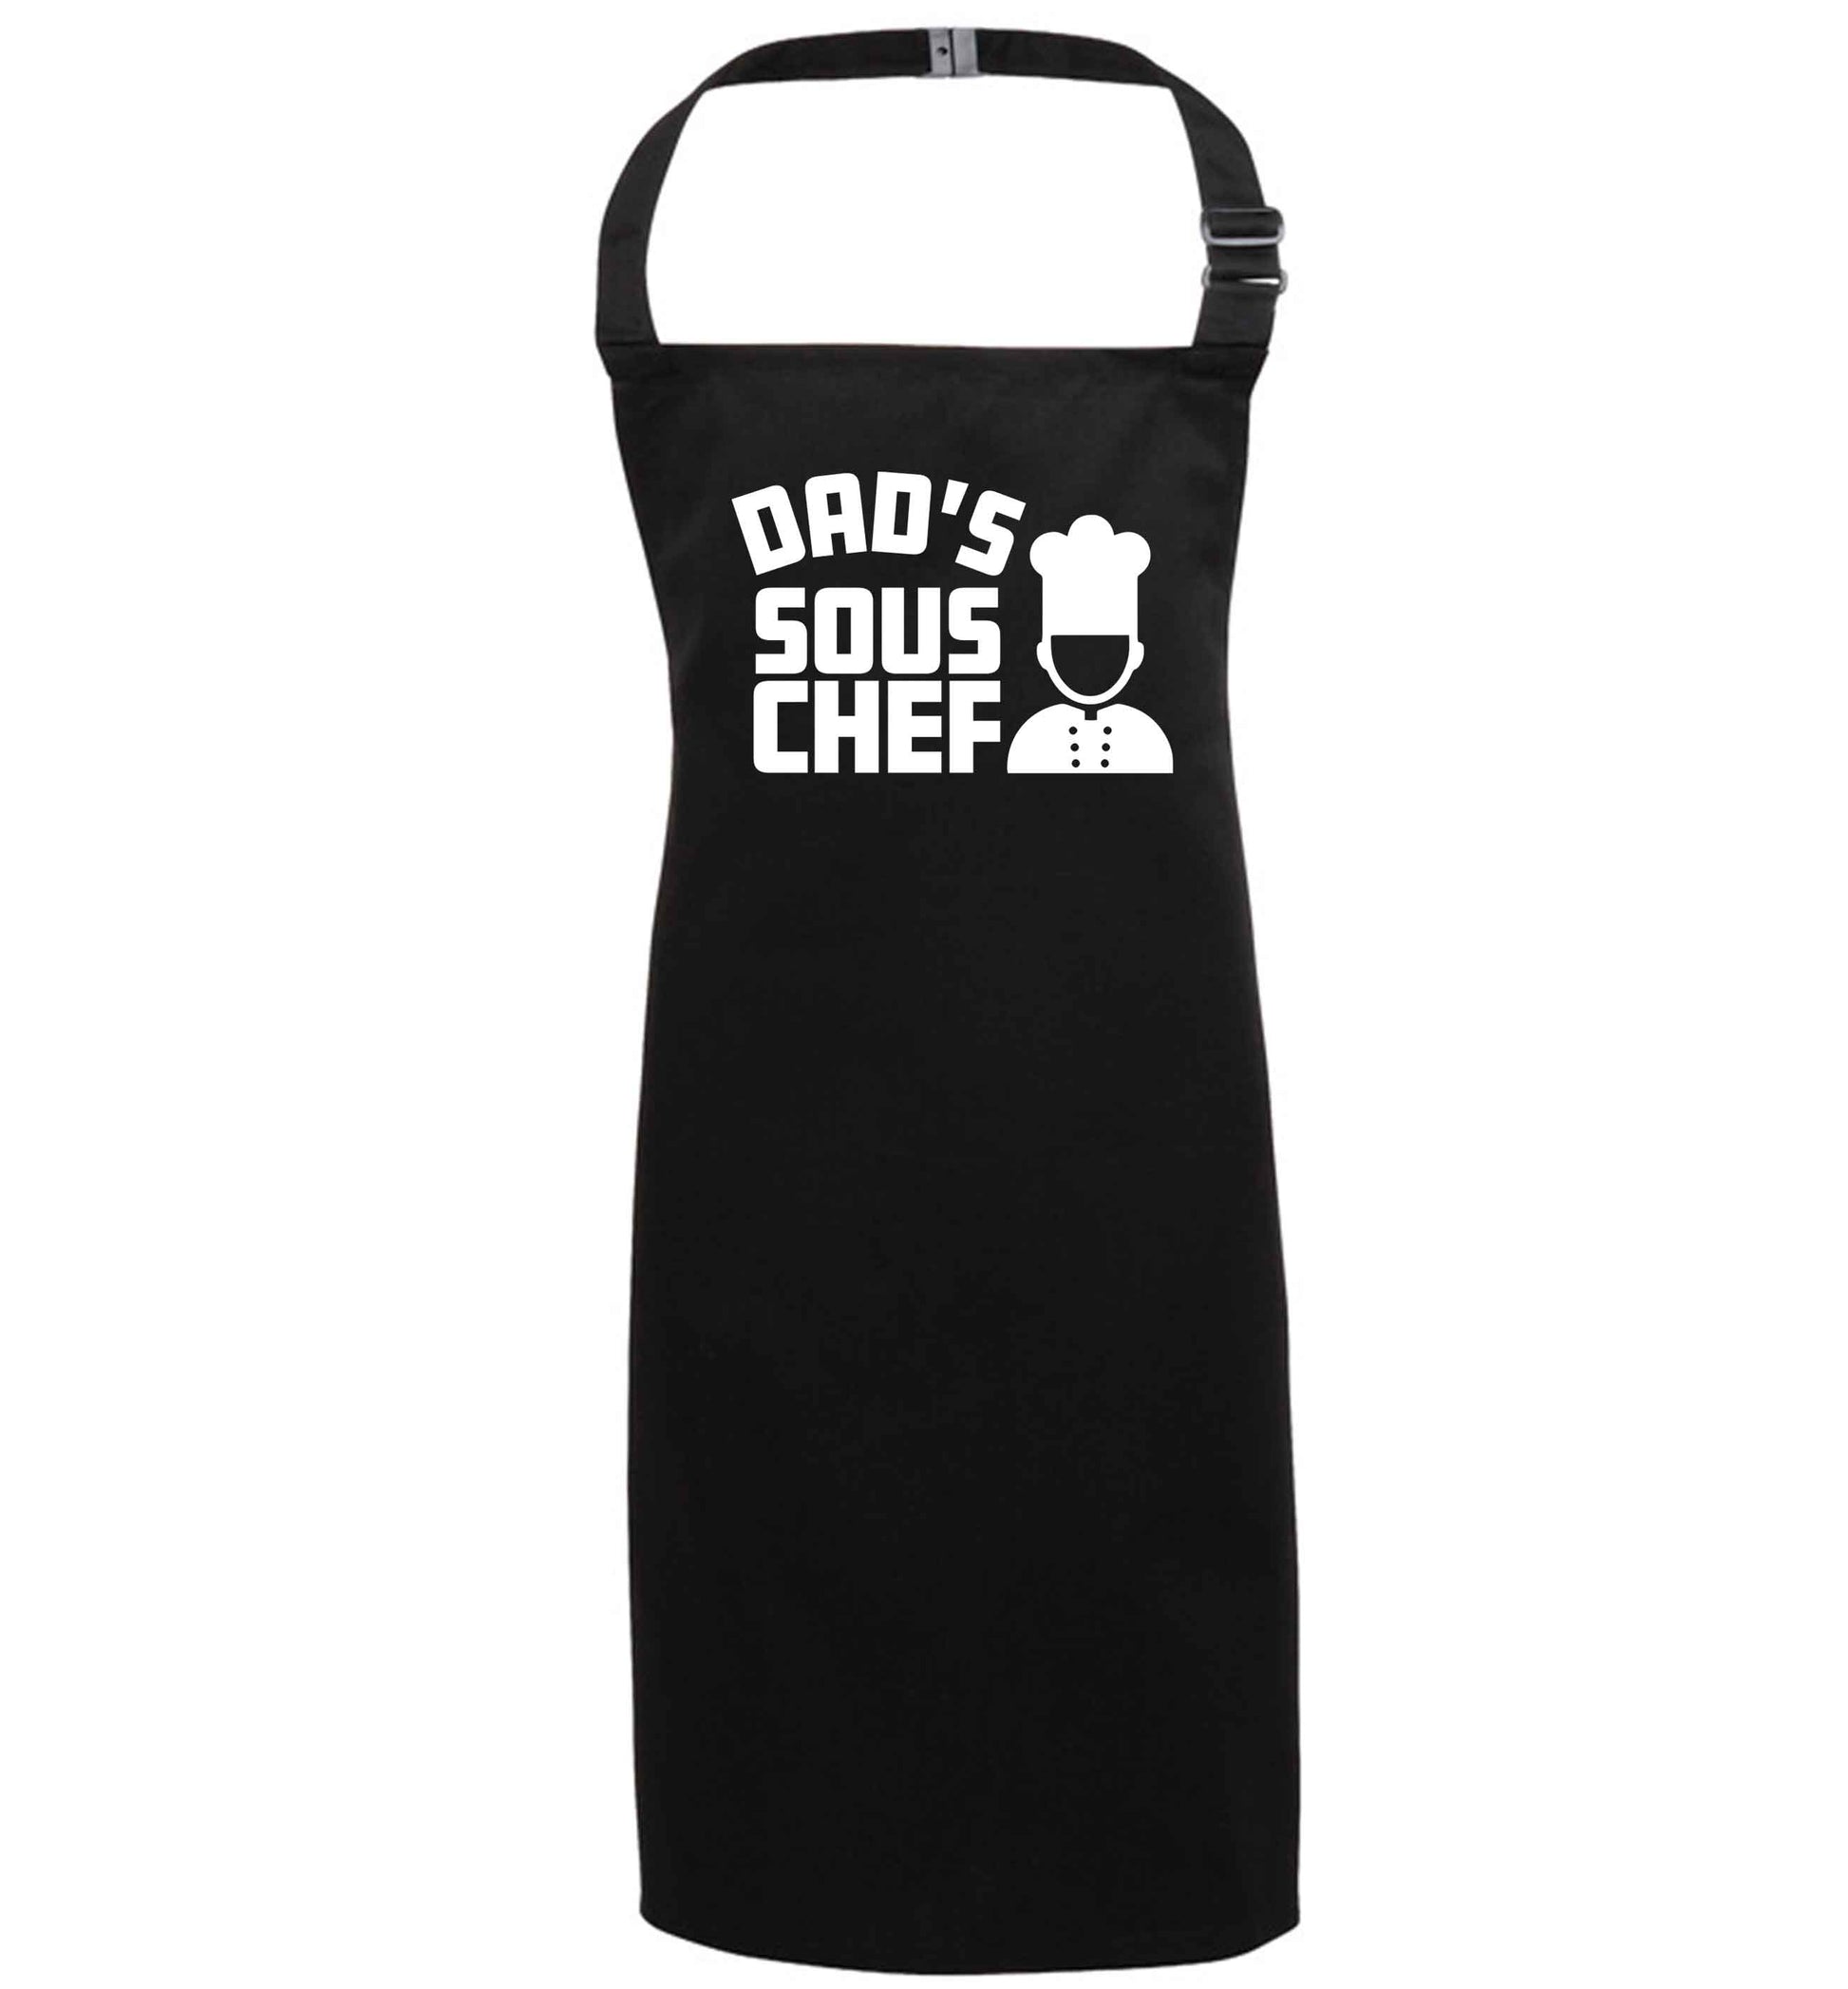 Dad's sous chef black apron 7-10 years